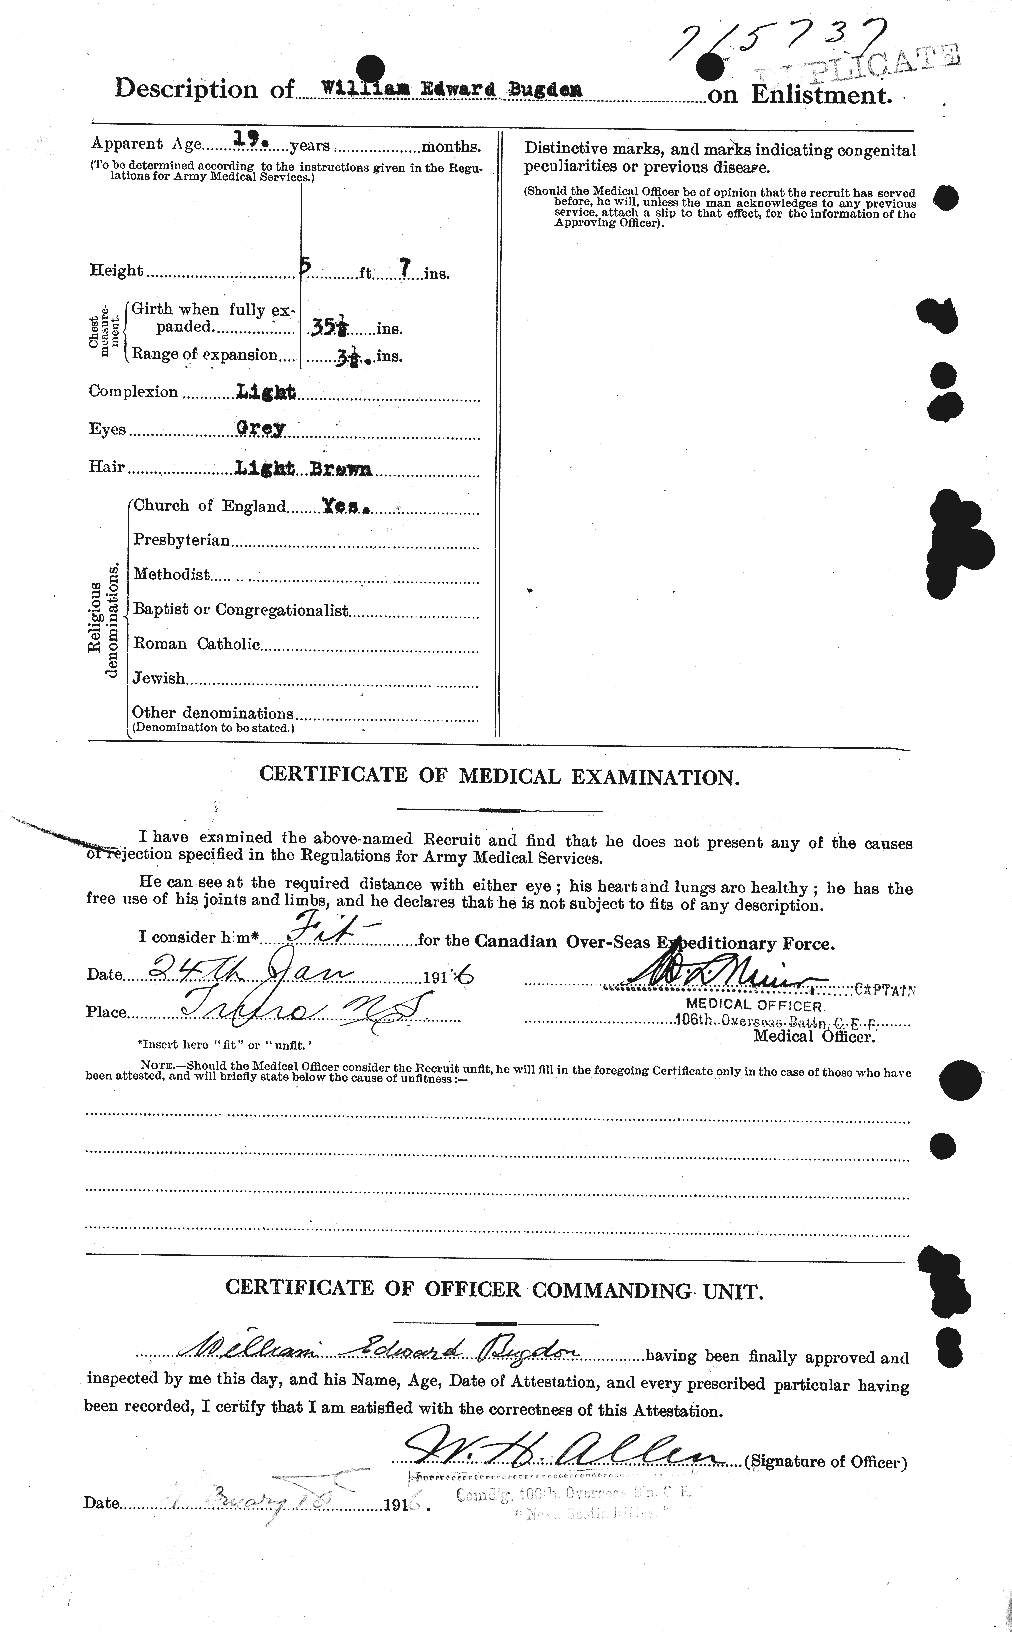 Personnel Records of the First World War - CEF 270506b